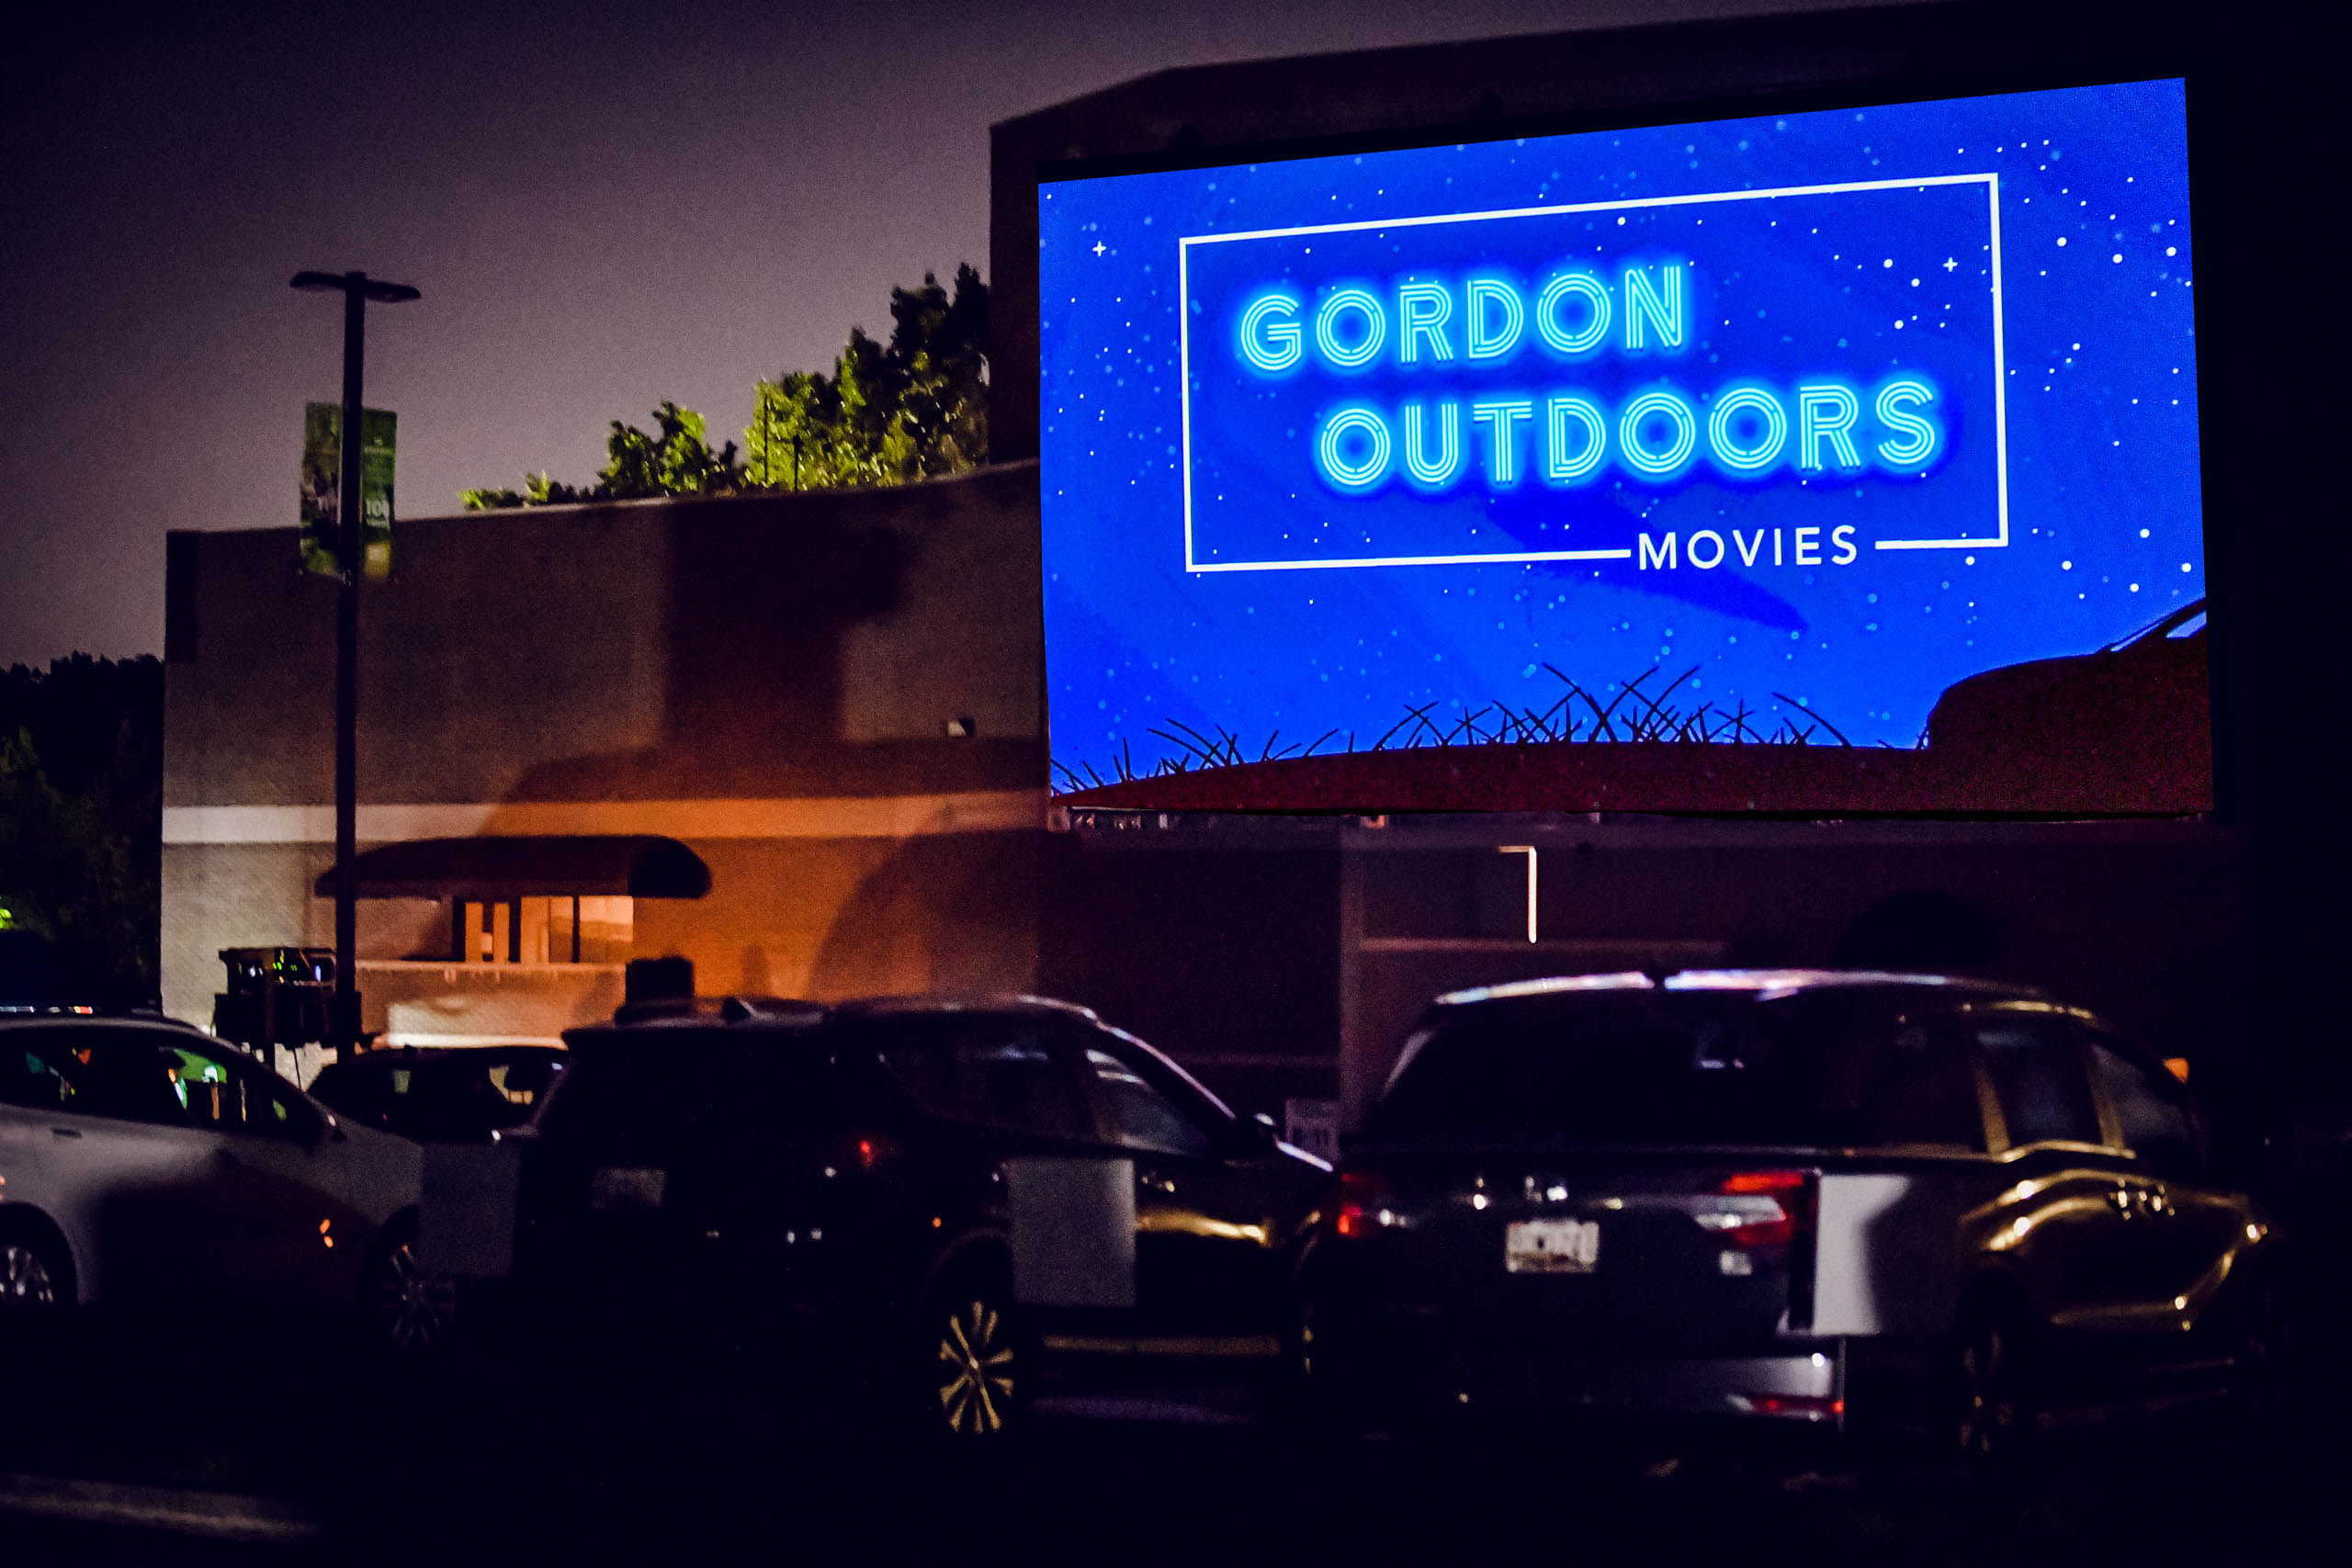 Outdoor movie screen that says Gordon Outdoors with cars in front.